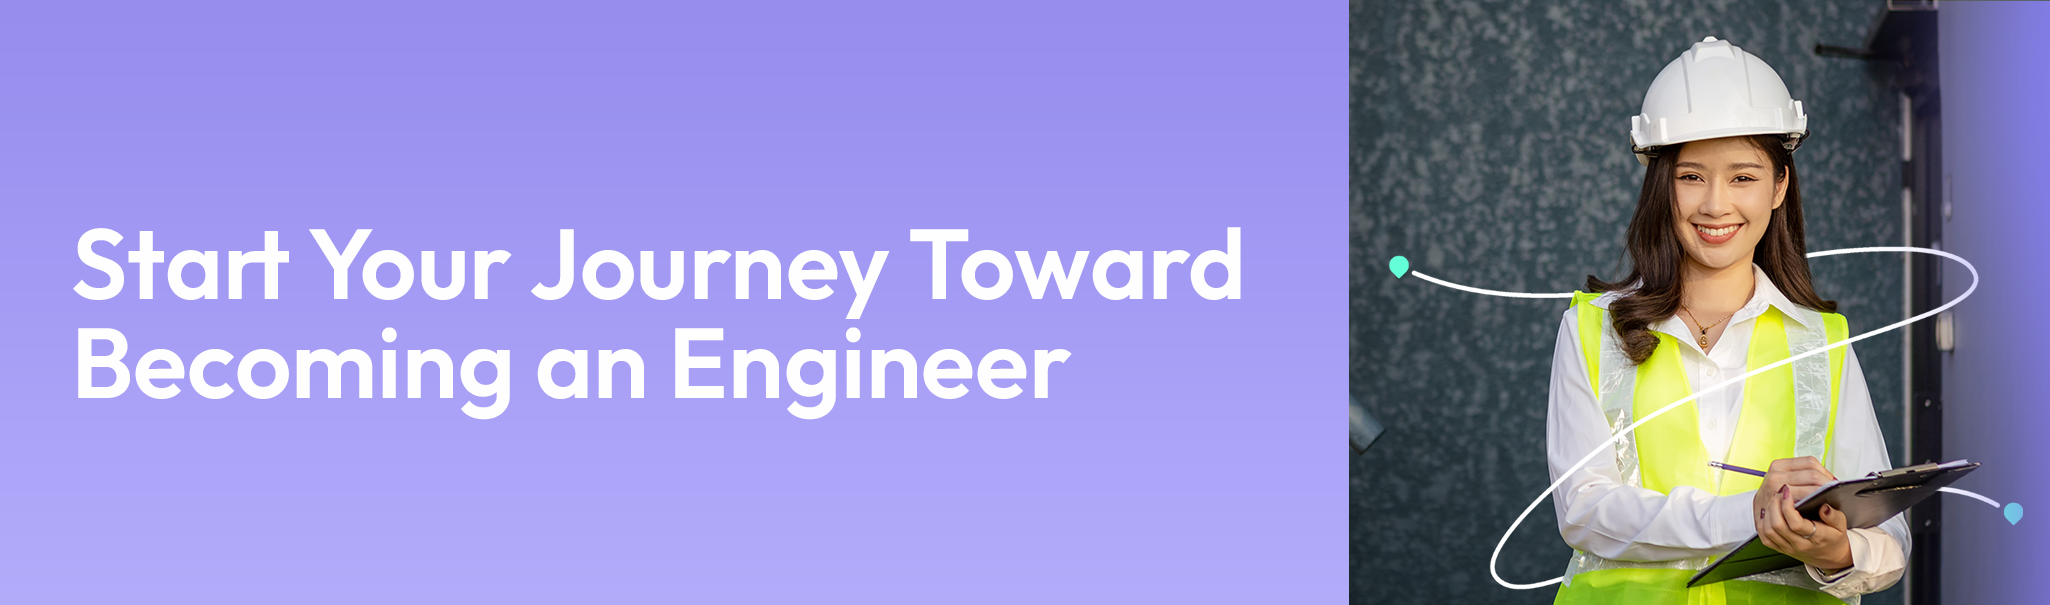 career-guide_engineer How to Become Engineer in Australia